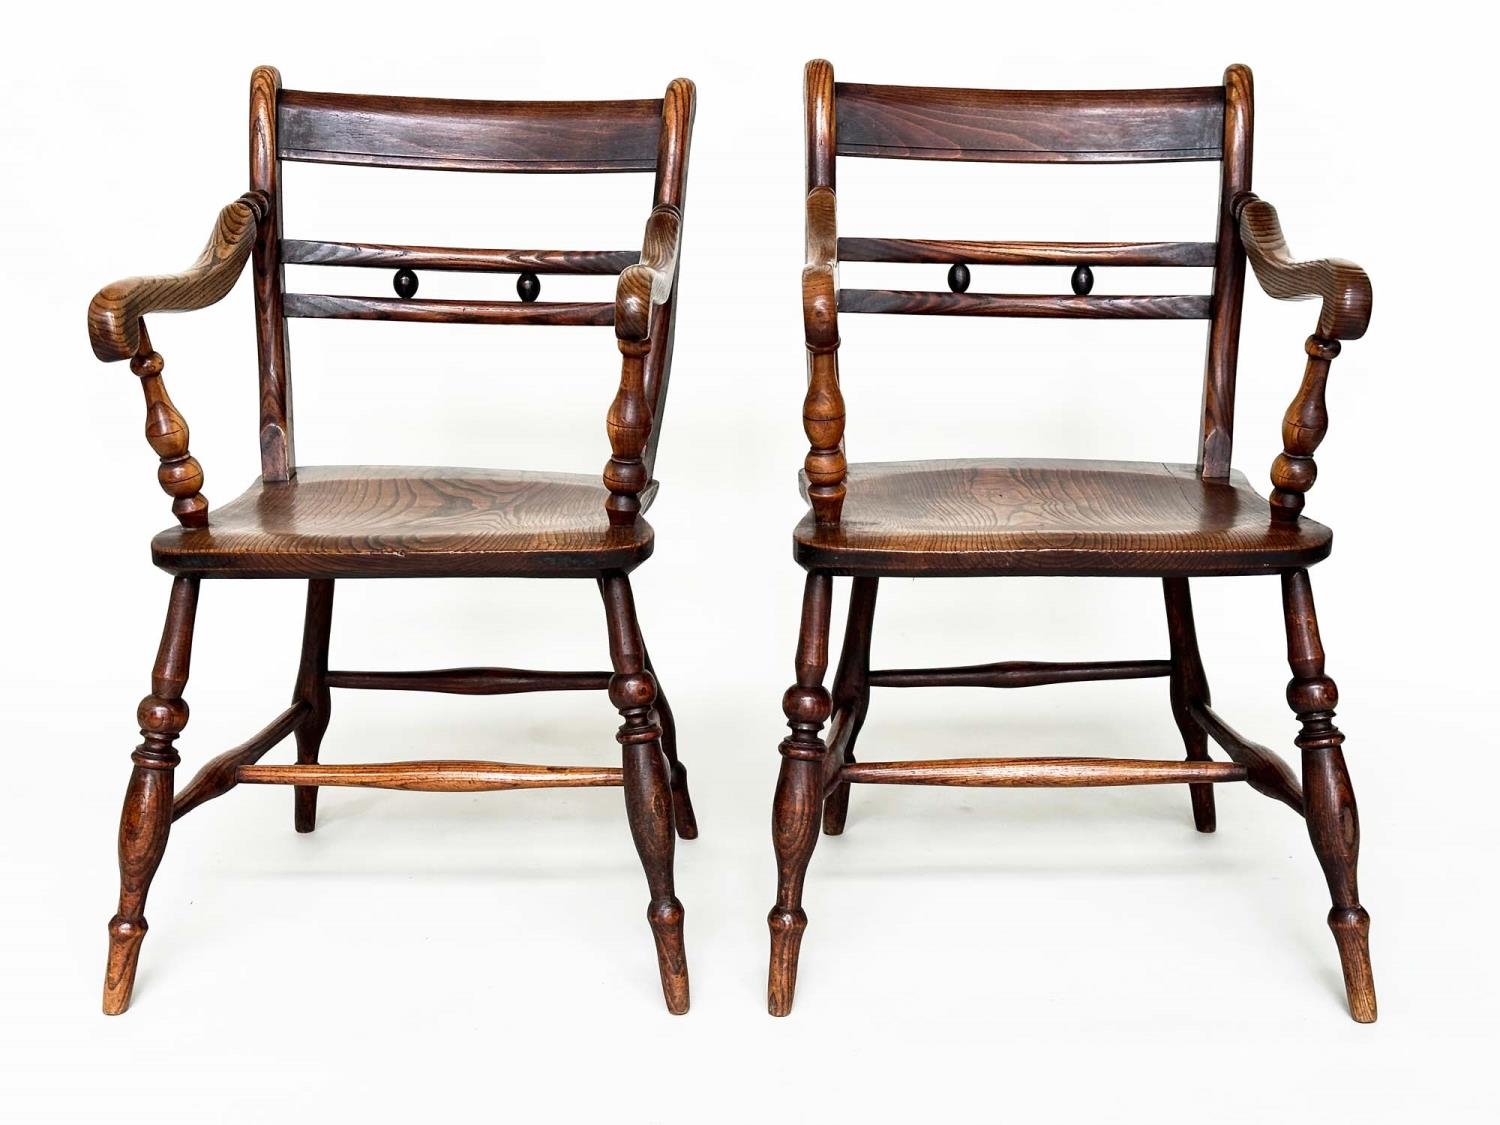 OXFORD ARMCHAIRS, a pair, 19th century English, High Wycombe, ash, elm and alder with shaped seats - Image 2 of 11